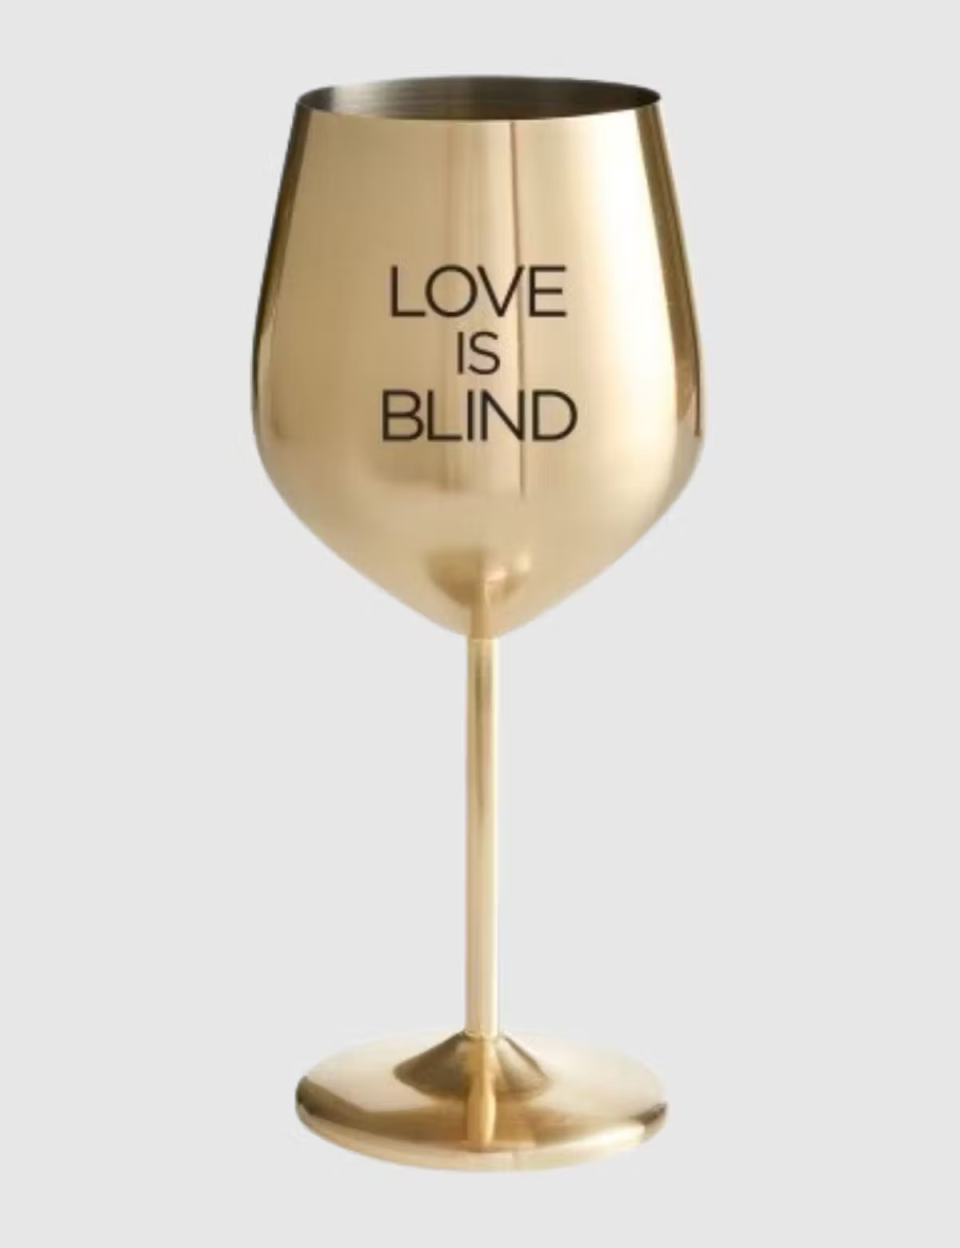 There’s Now An Official ‘love Is Blind’ Wine To Fill Your Golden Goblet — Here’s Where To Shop